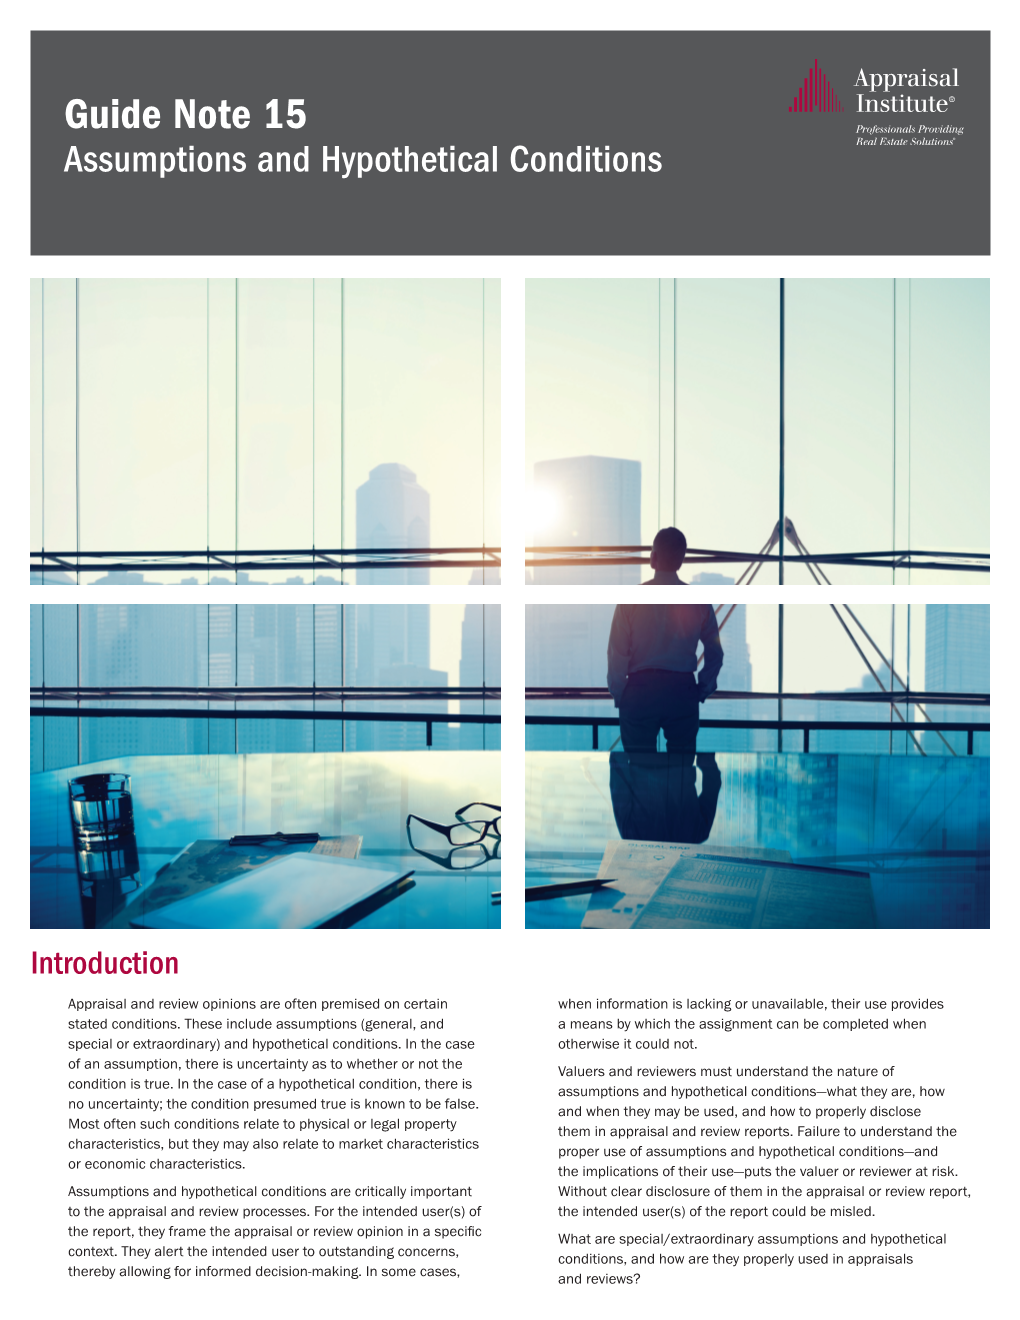 Guide Note 15 Assumptions and Hypothetical Conditions